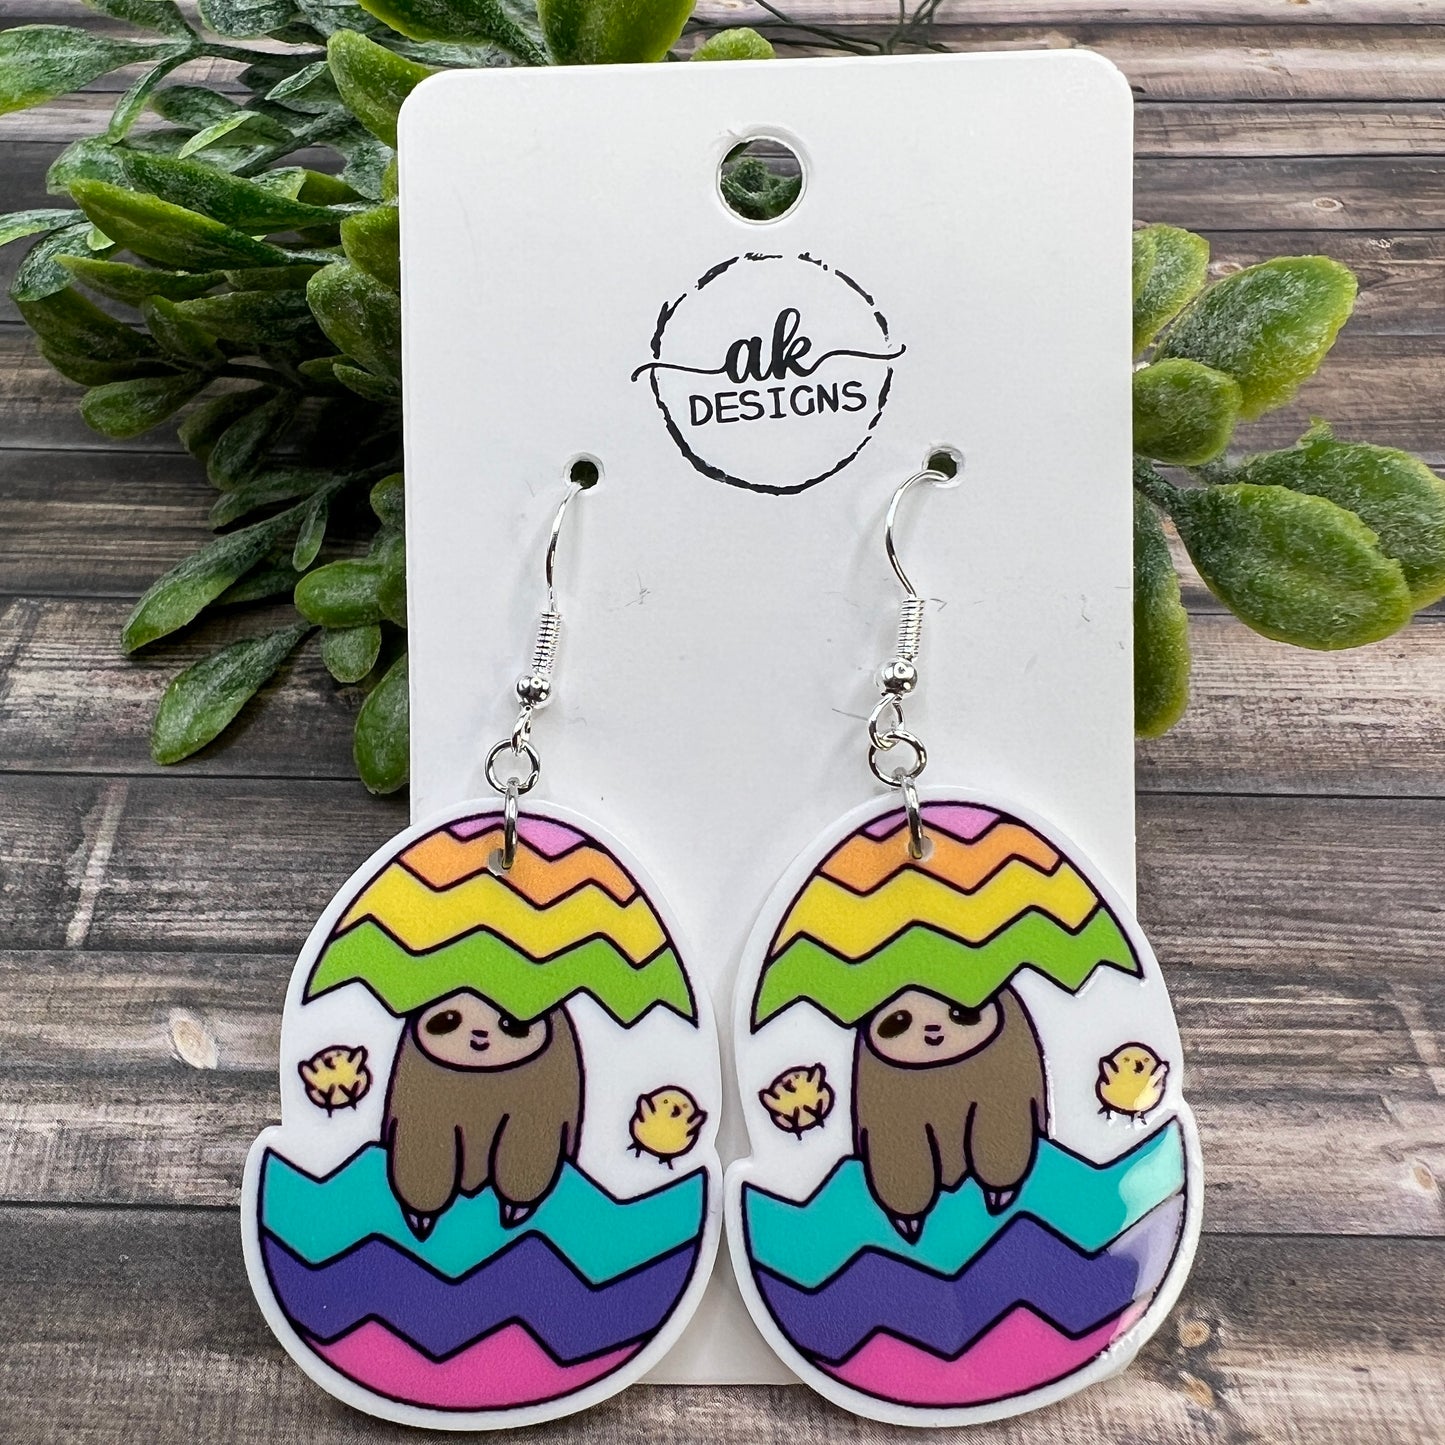 Easter Egg Sloth Chick Lightweight Acrylic  Earrings, Hypoallergenic - Clearance